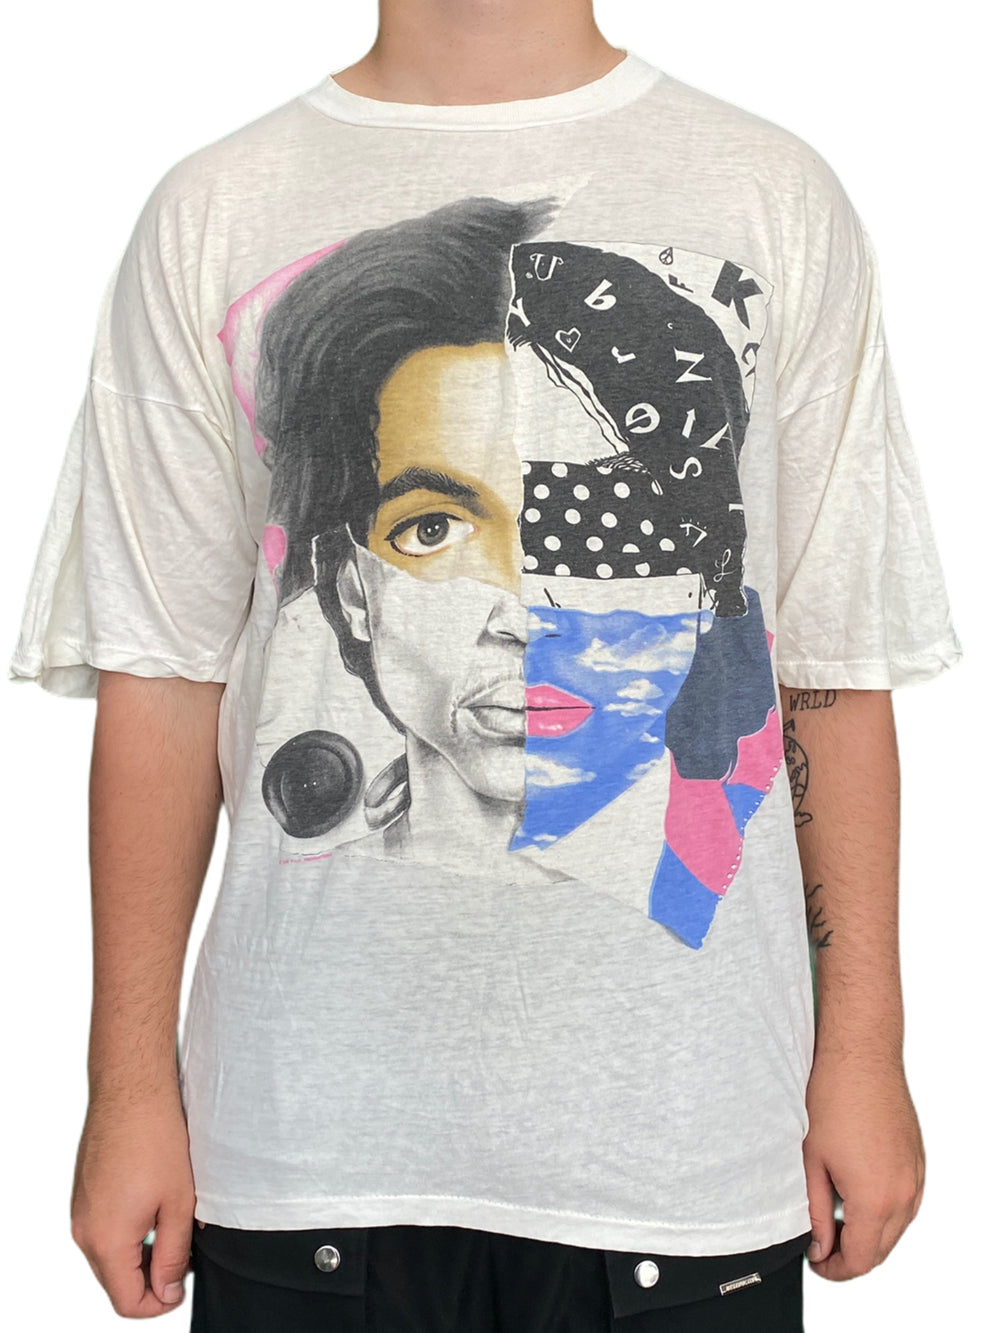 Prince – Official Vintage 1988 Lovesexy Tour PRN Productions Unisex T Shirt Face